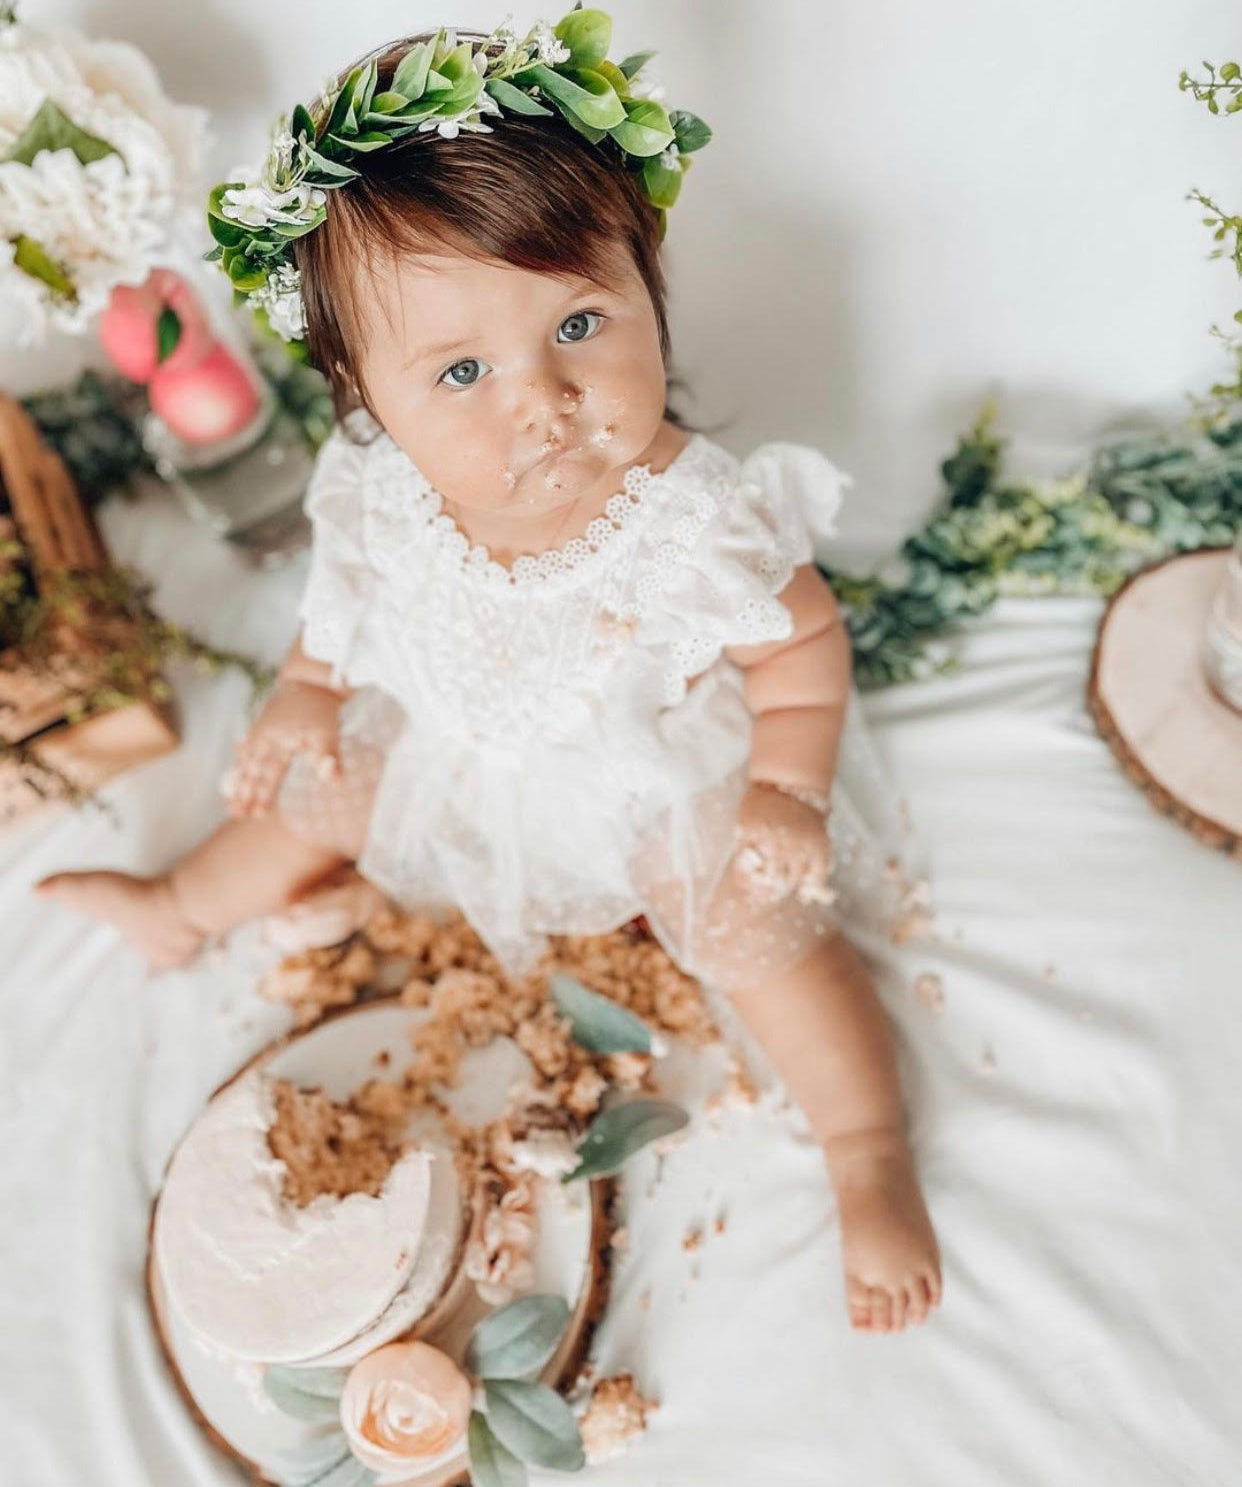 Everything you dream of for her perfect first birthday is what this gentle lace romper is composed of